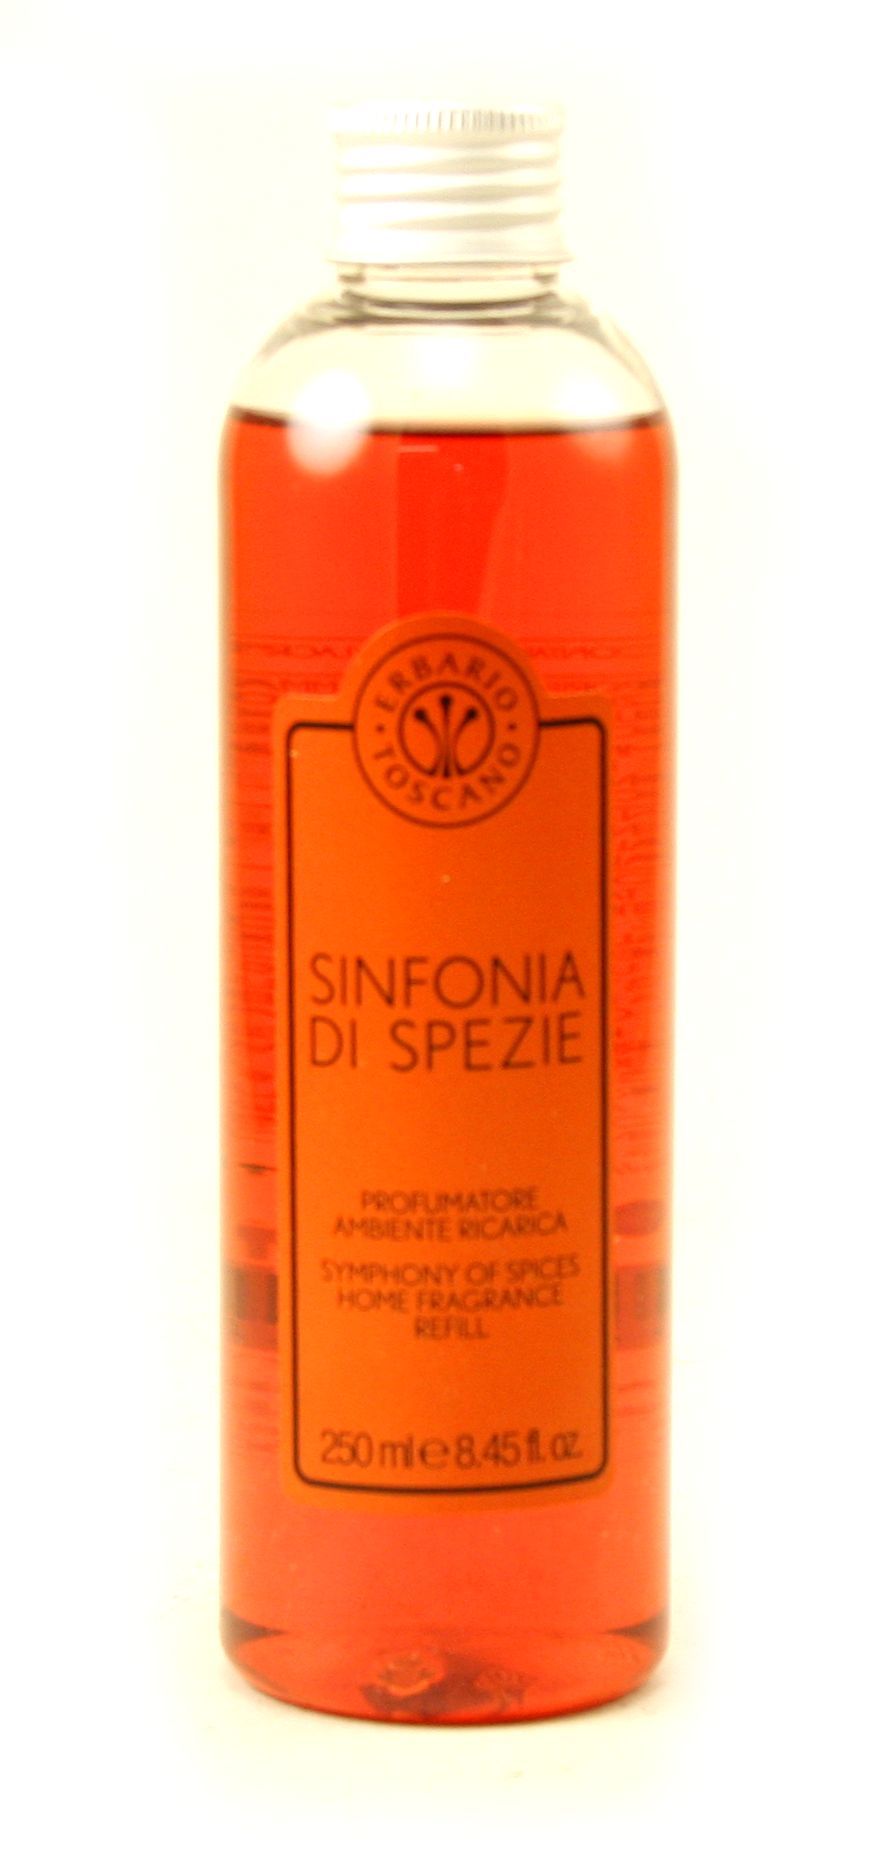 SYMPHONY of SPICES - REFILL Erbario Toscano 500 ml Reed Diffuser